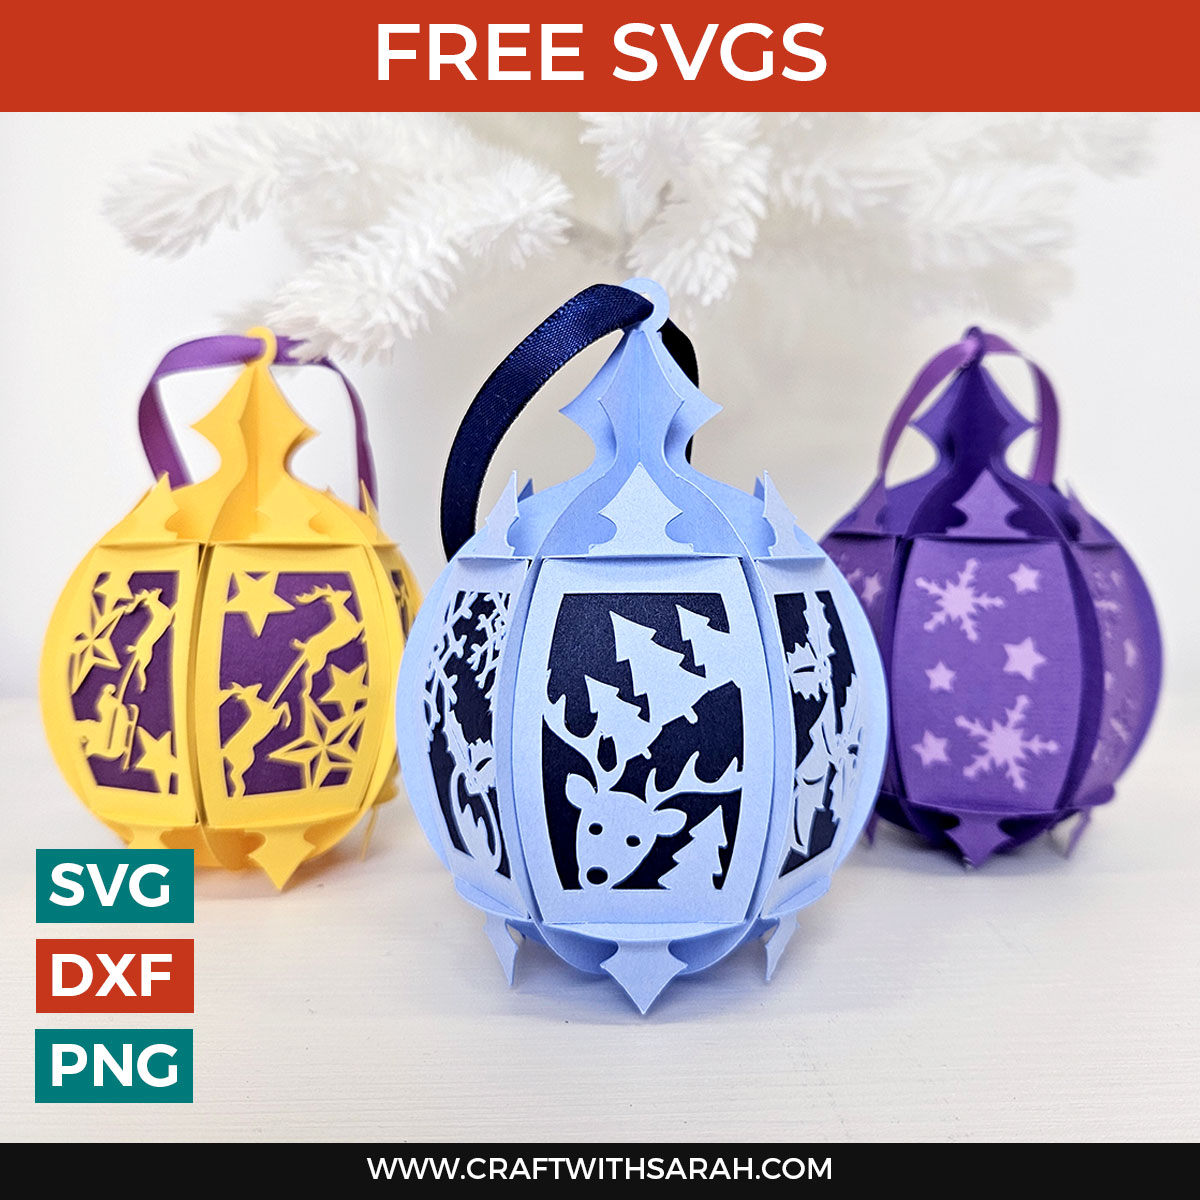 Creating 3D Ornaments – 2 ways: Sublimation and Print and Cut